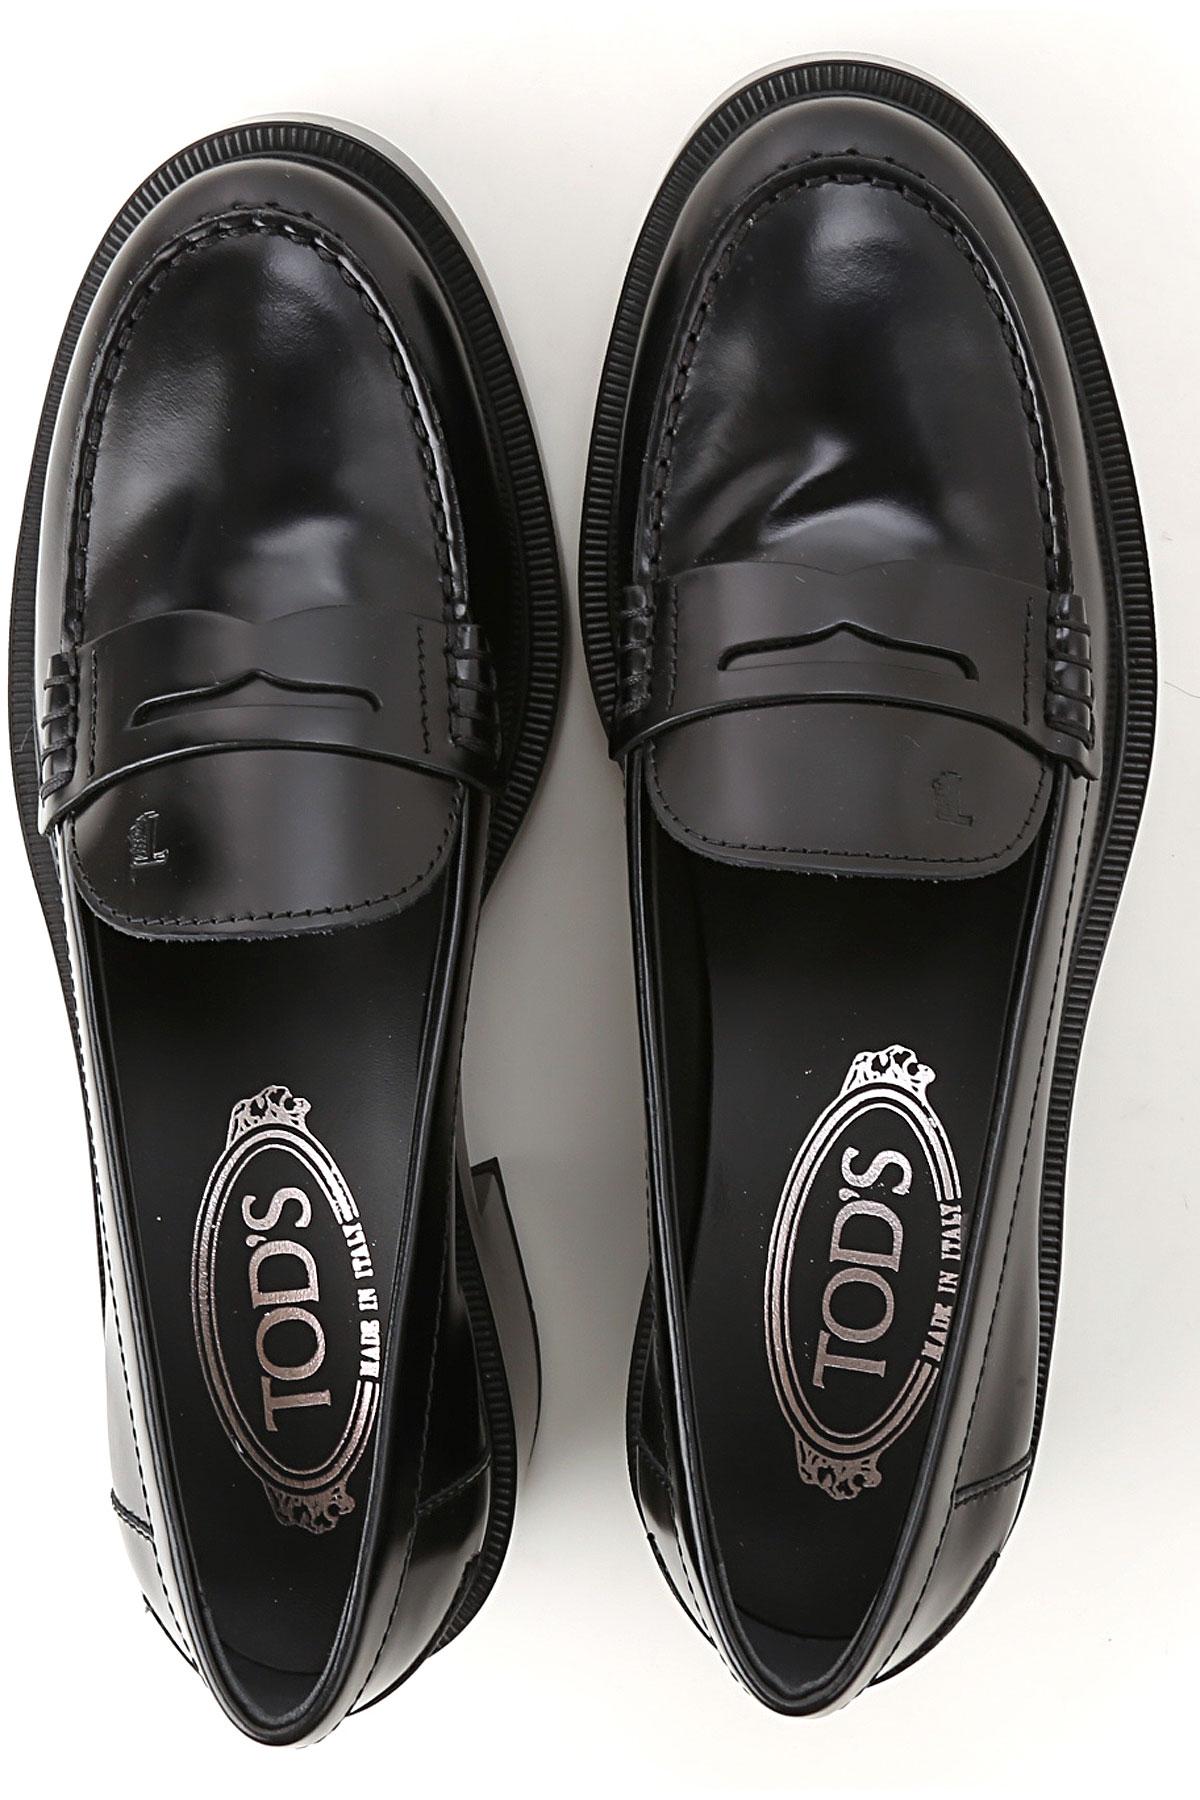 Tod's Leather Loafers For Women On Sale In Outlet in Black - Lyst